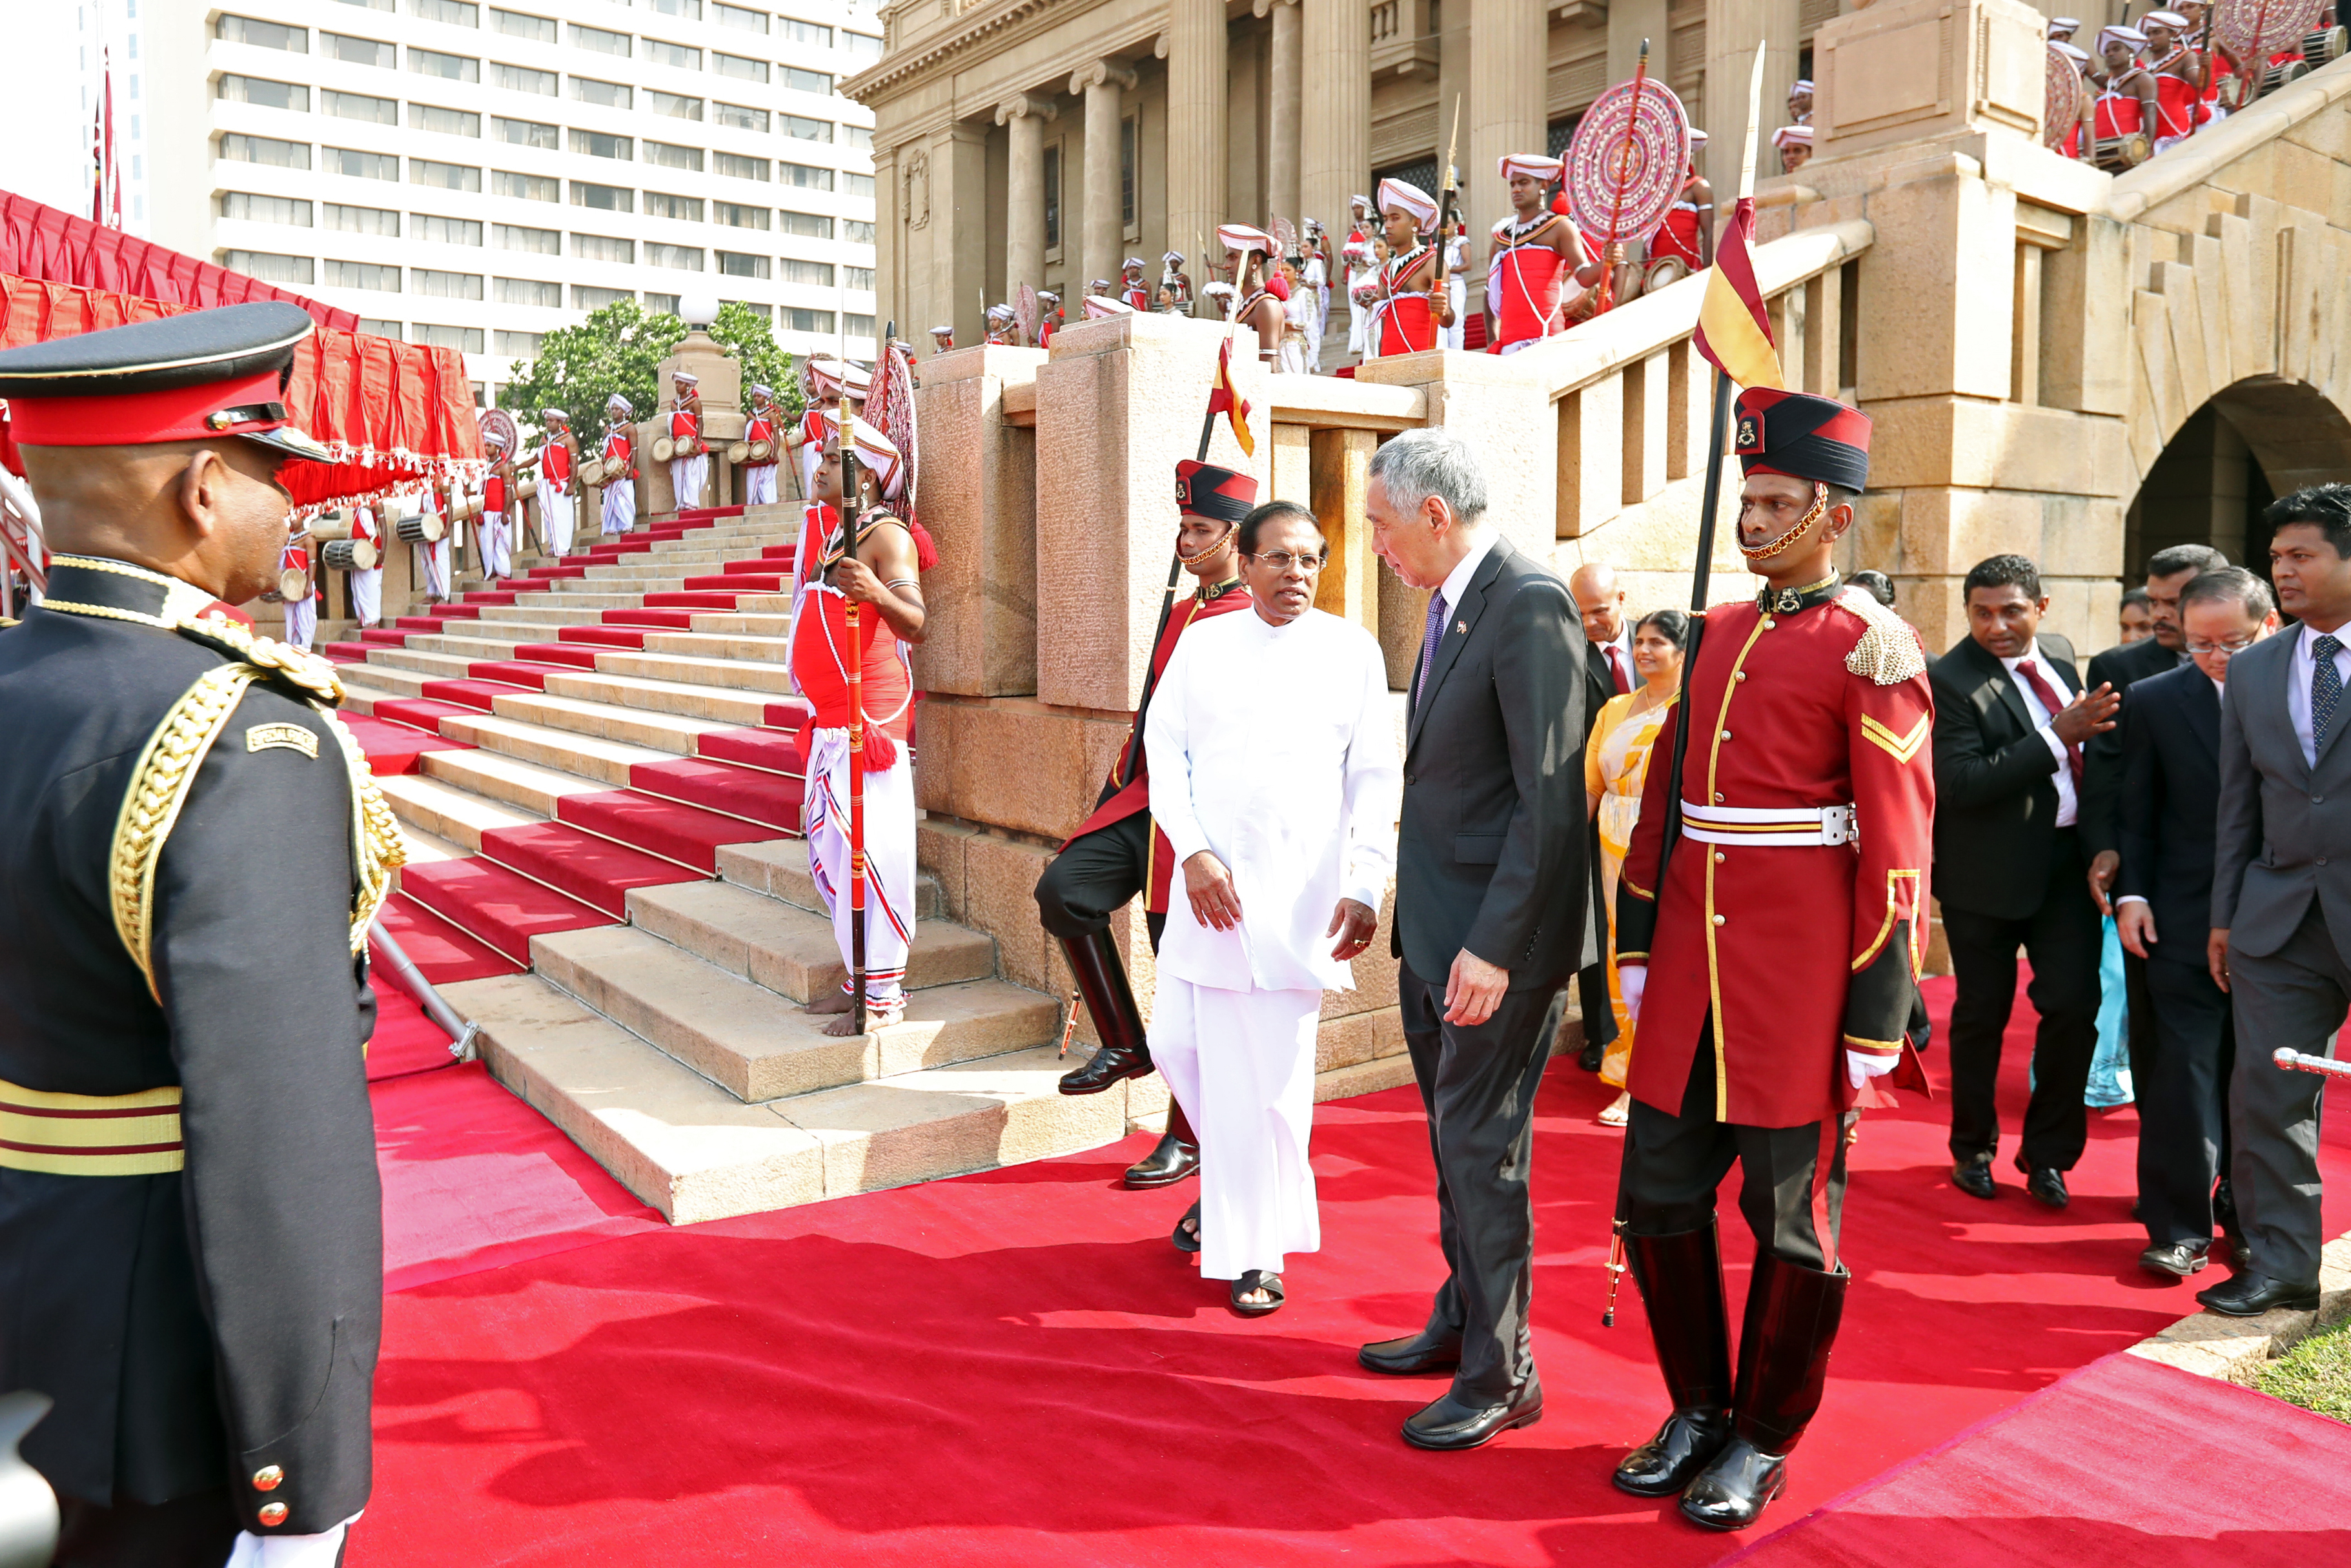 Official Visit to Sri Lanka by PM Lee Hsien Loong in January 2018 (MCI Photo by Fyrol)